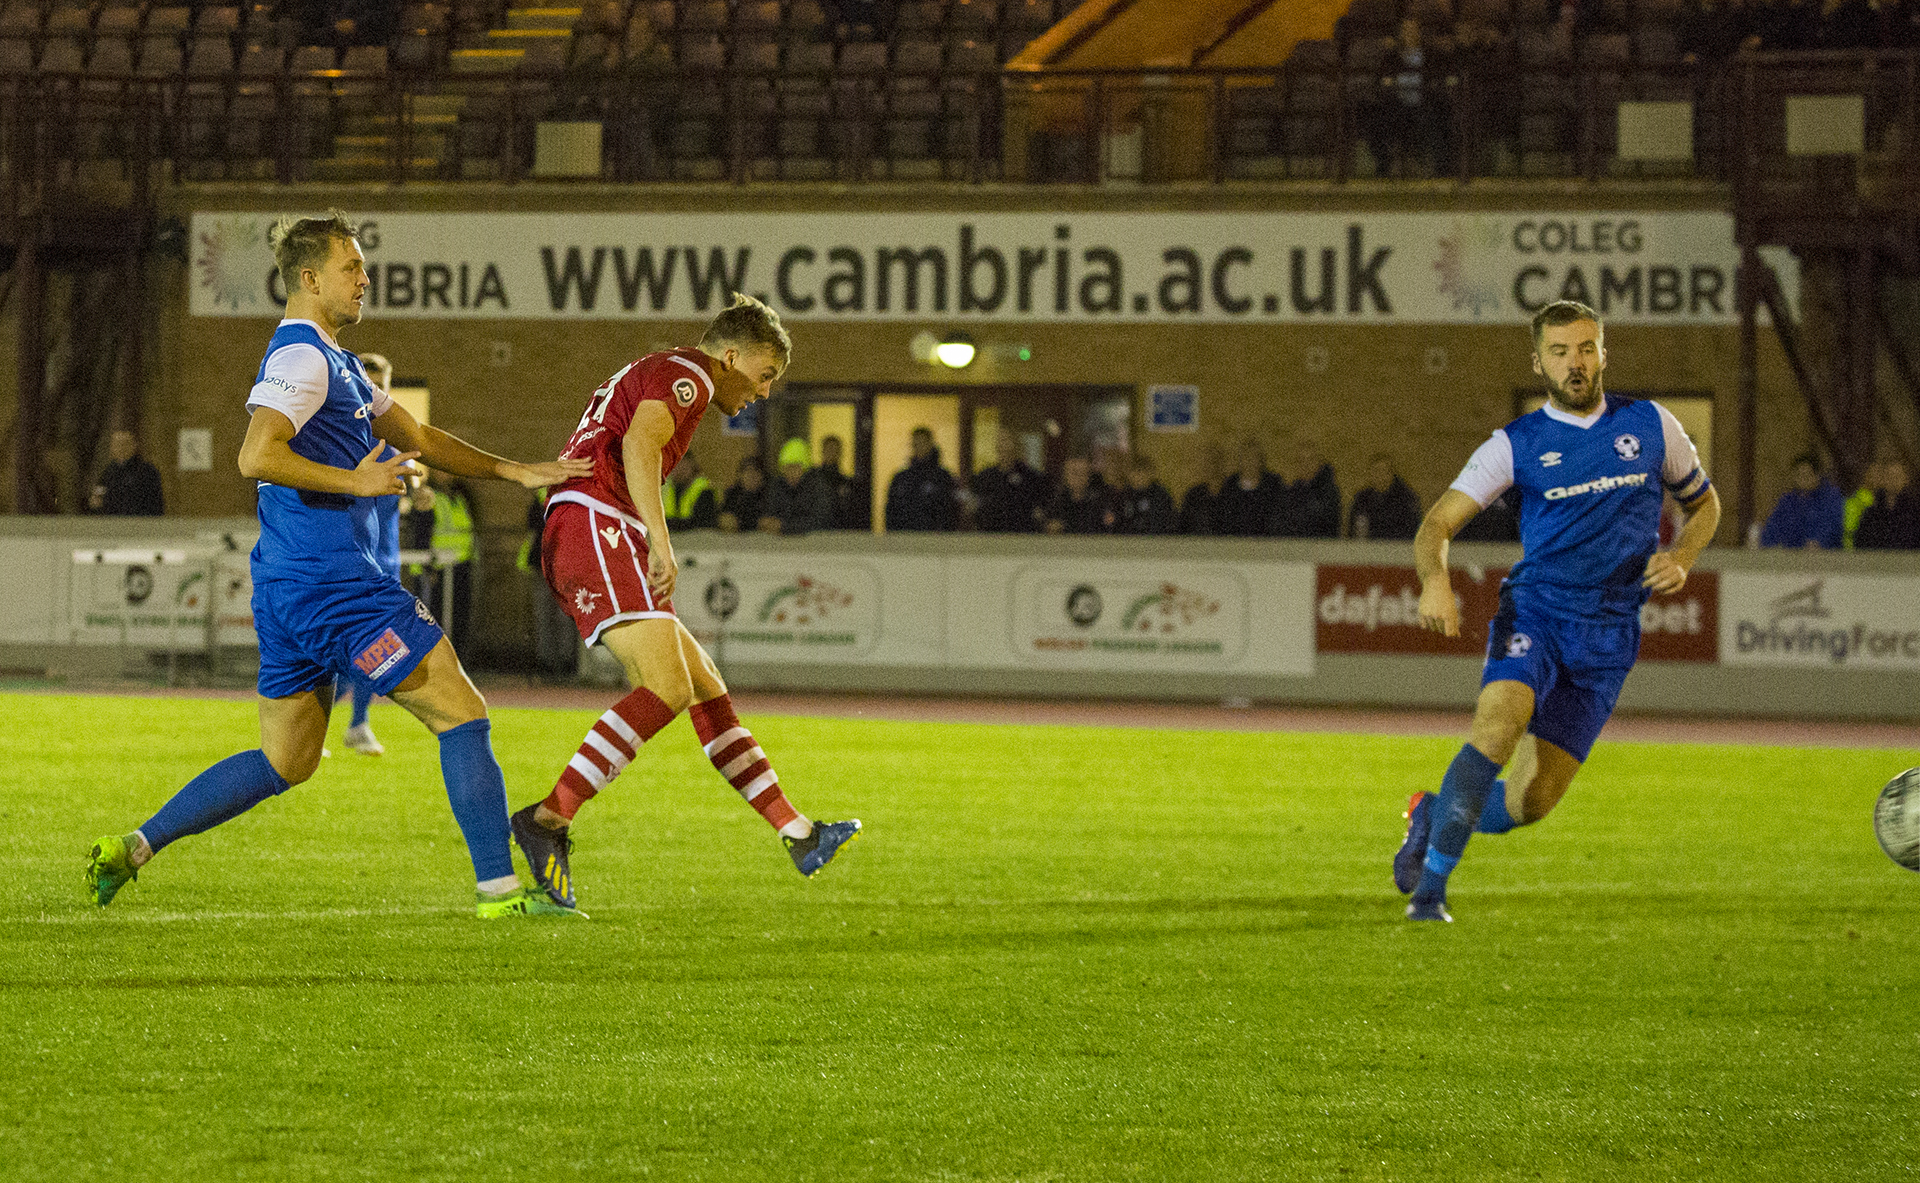 Rob Hughes doubles his tally early in the second half © NCM Media